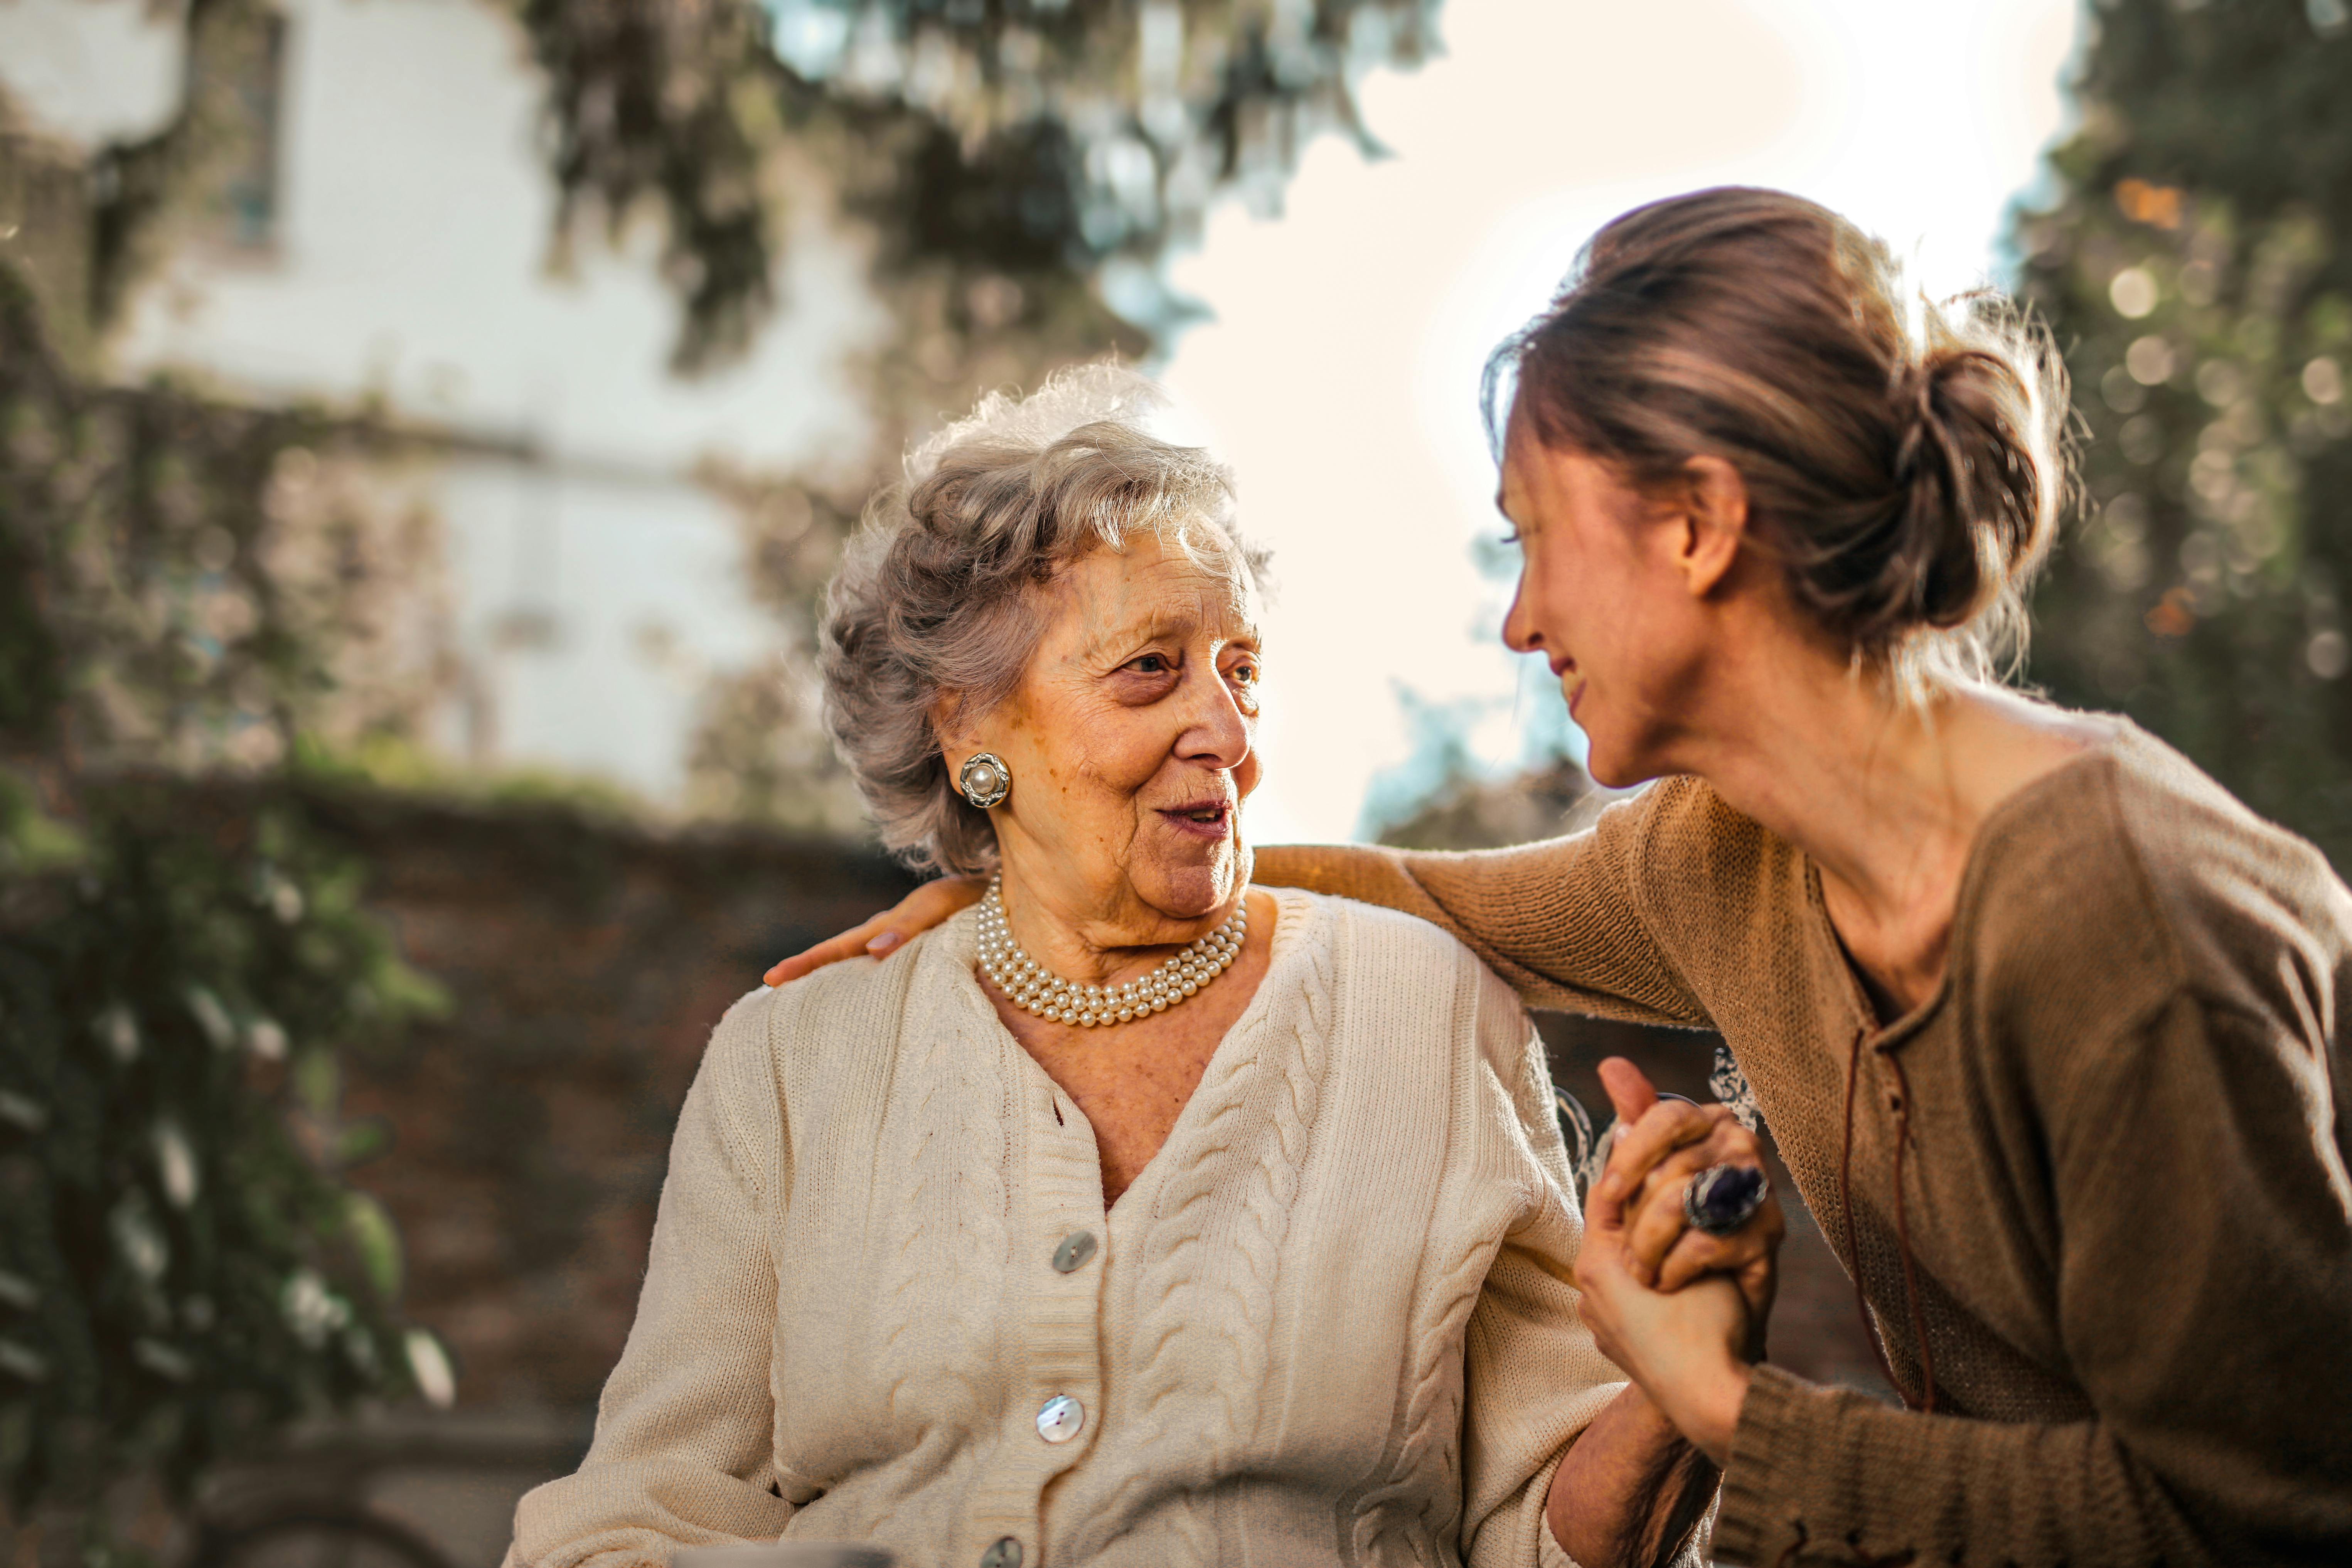 Caregiver Role Strain: What Are the Signs and How to Prevent It